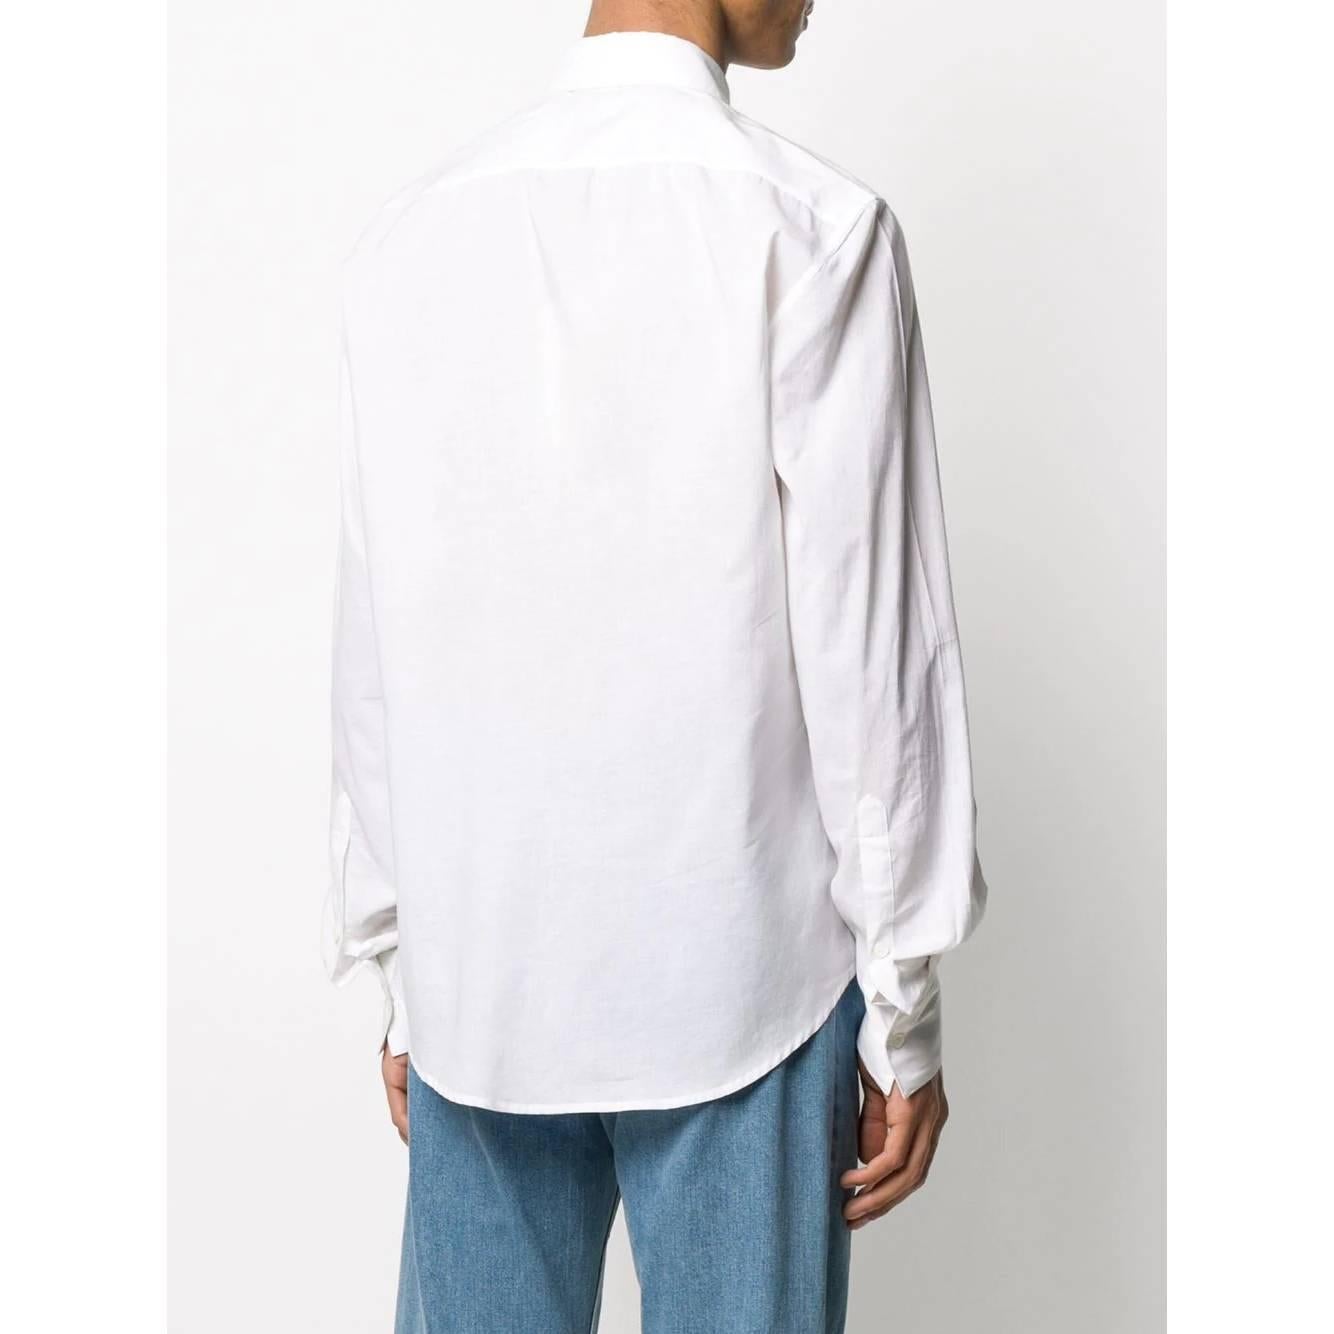 Gray 1990s Gianfranco Ferré Embroidered White Shirt